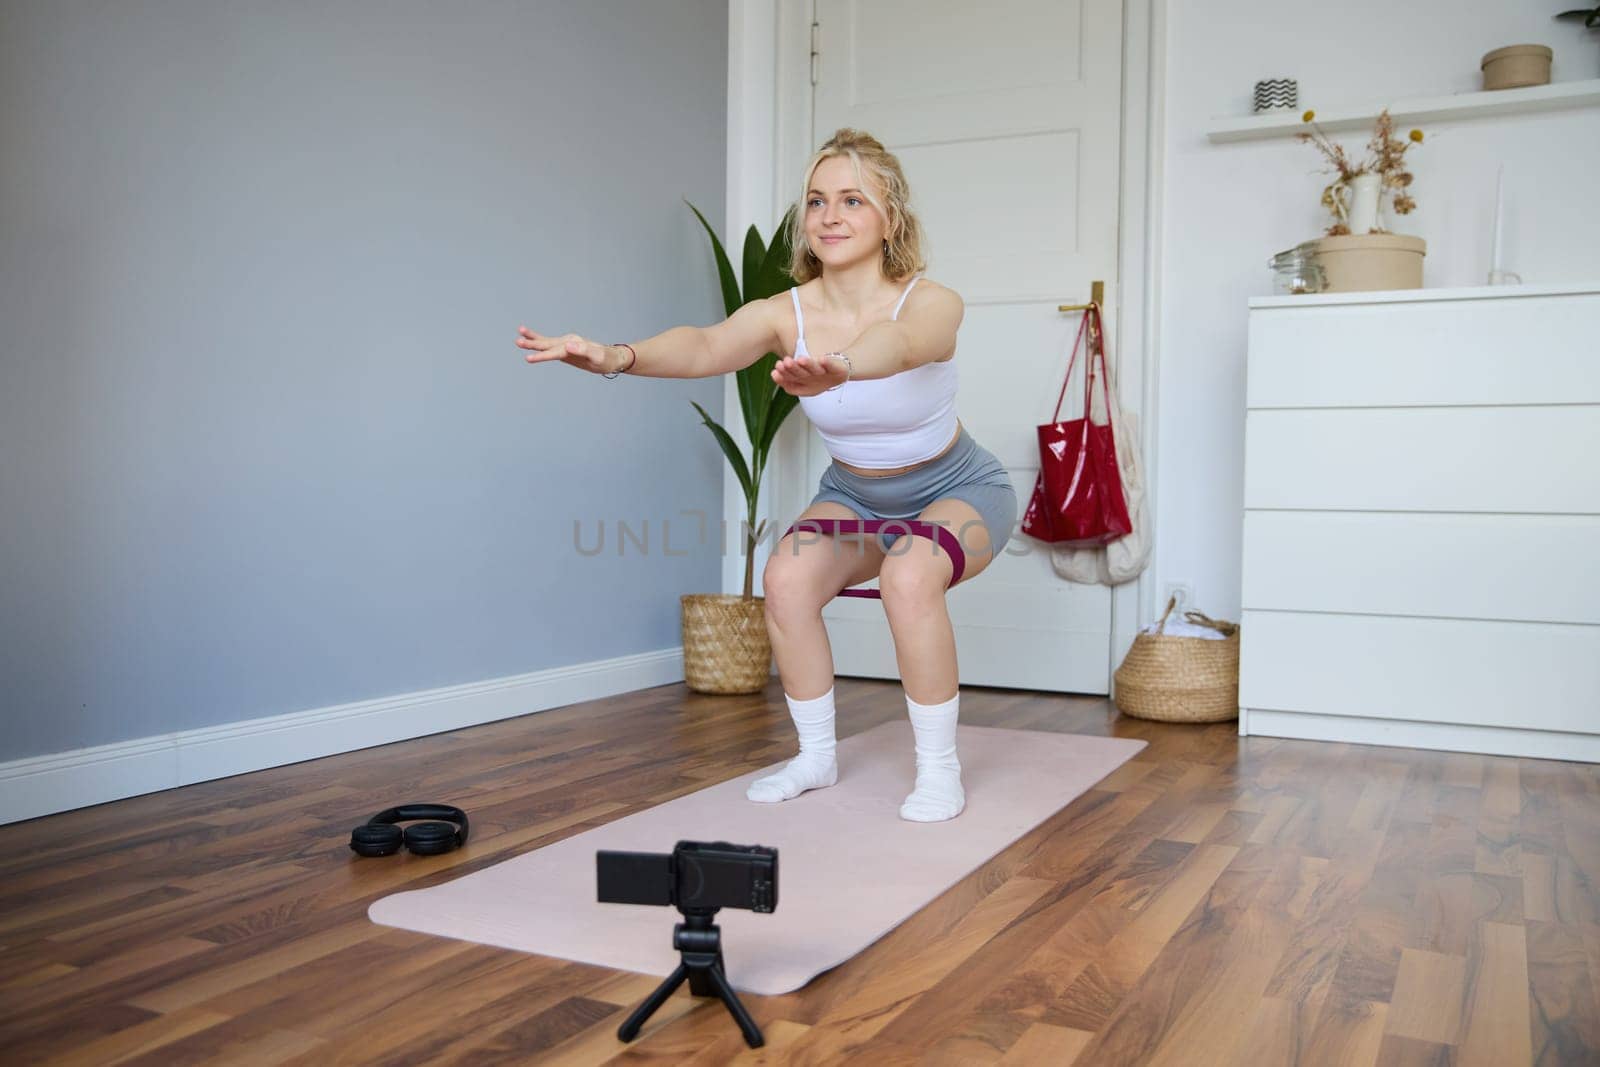 Portrait of woman, fitness instructor at home, recording video about workout, showing how to do leg exercises, squats with elastic resistance band, working out indoors on yoga mat.